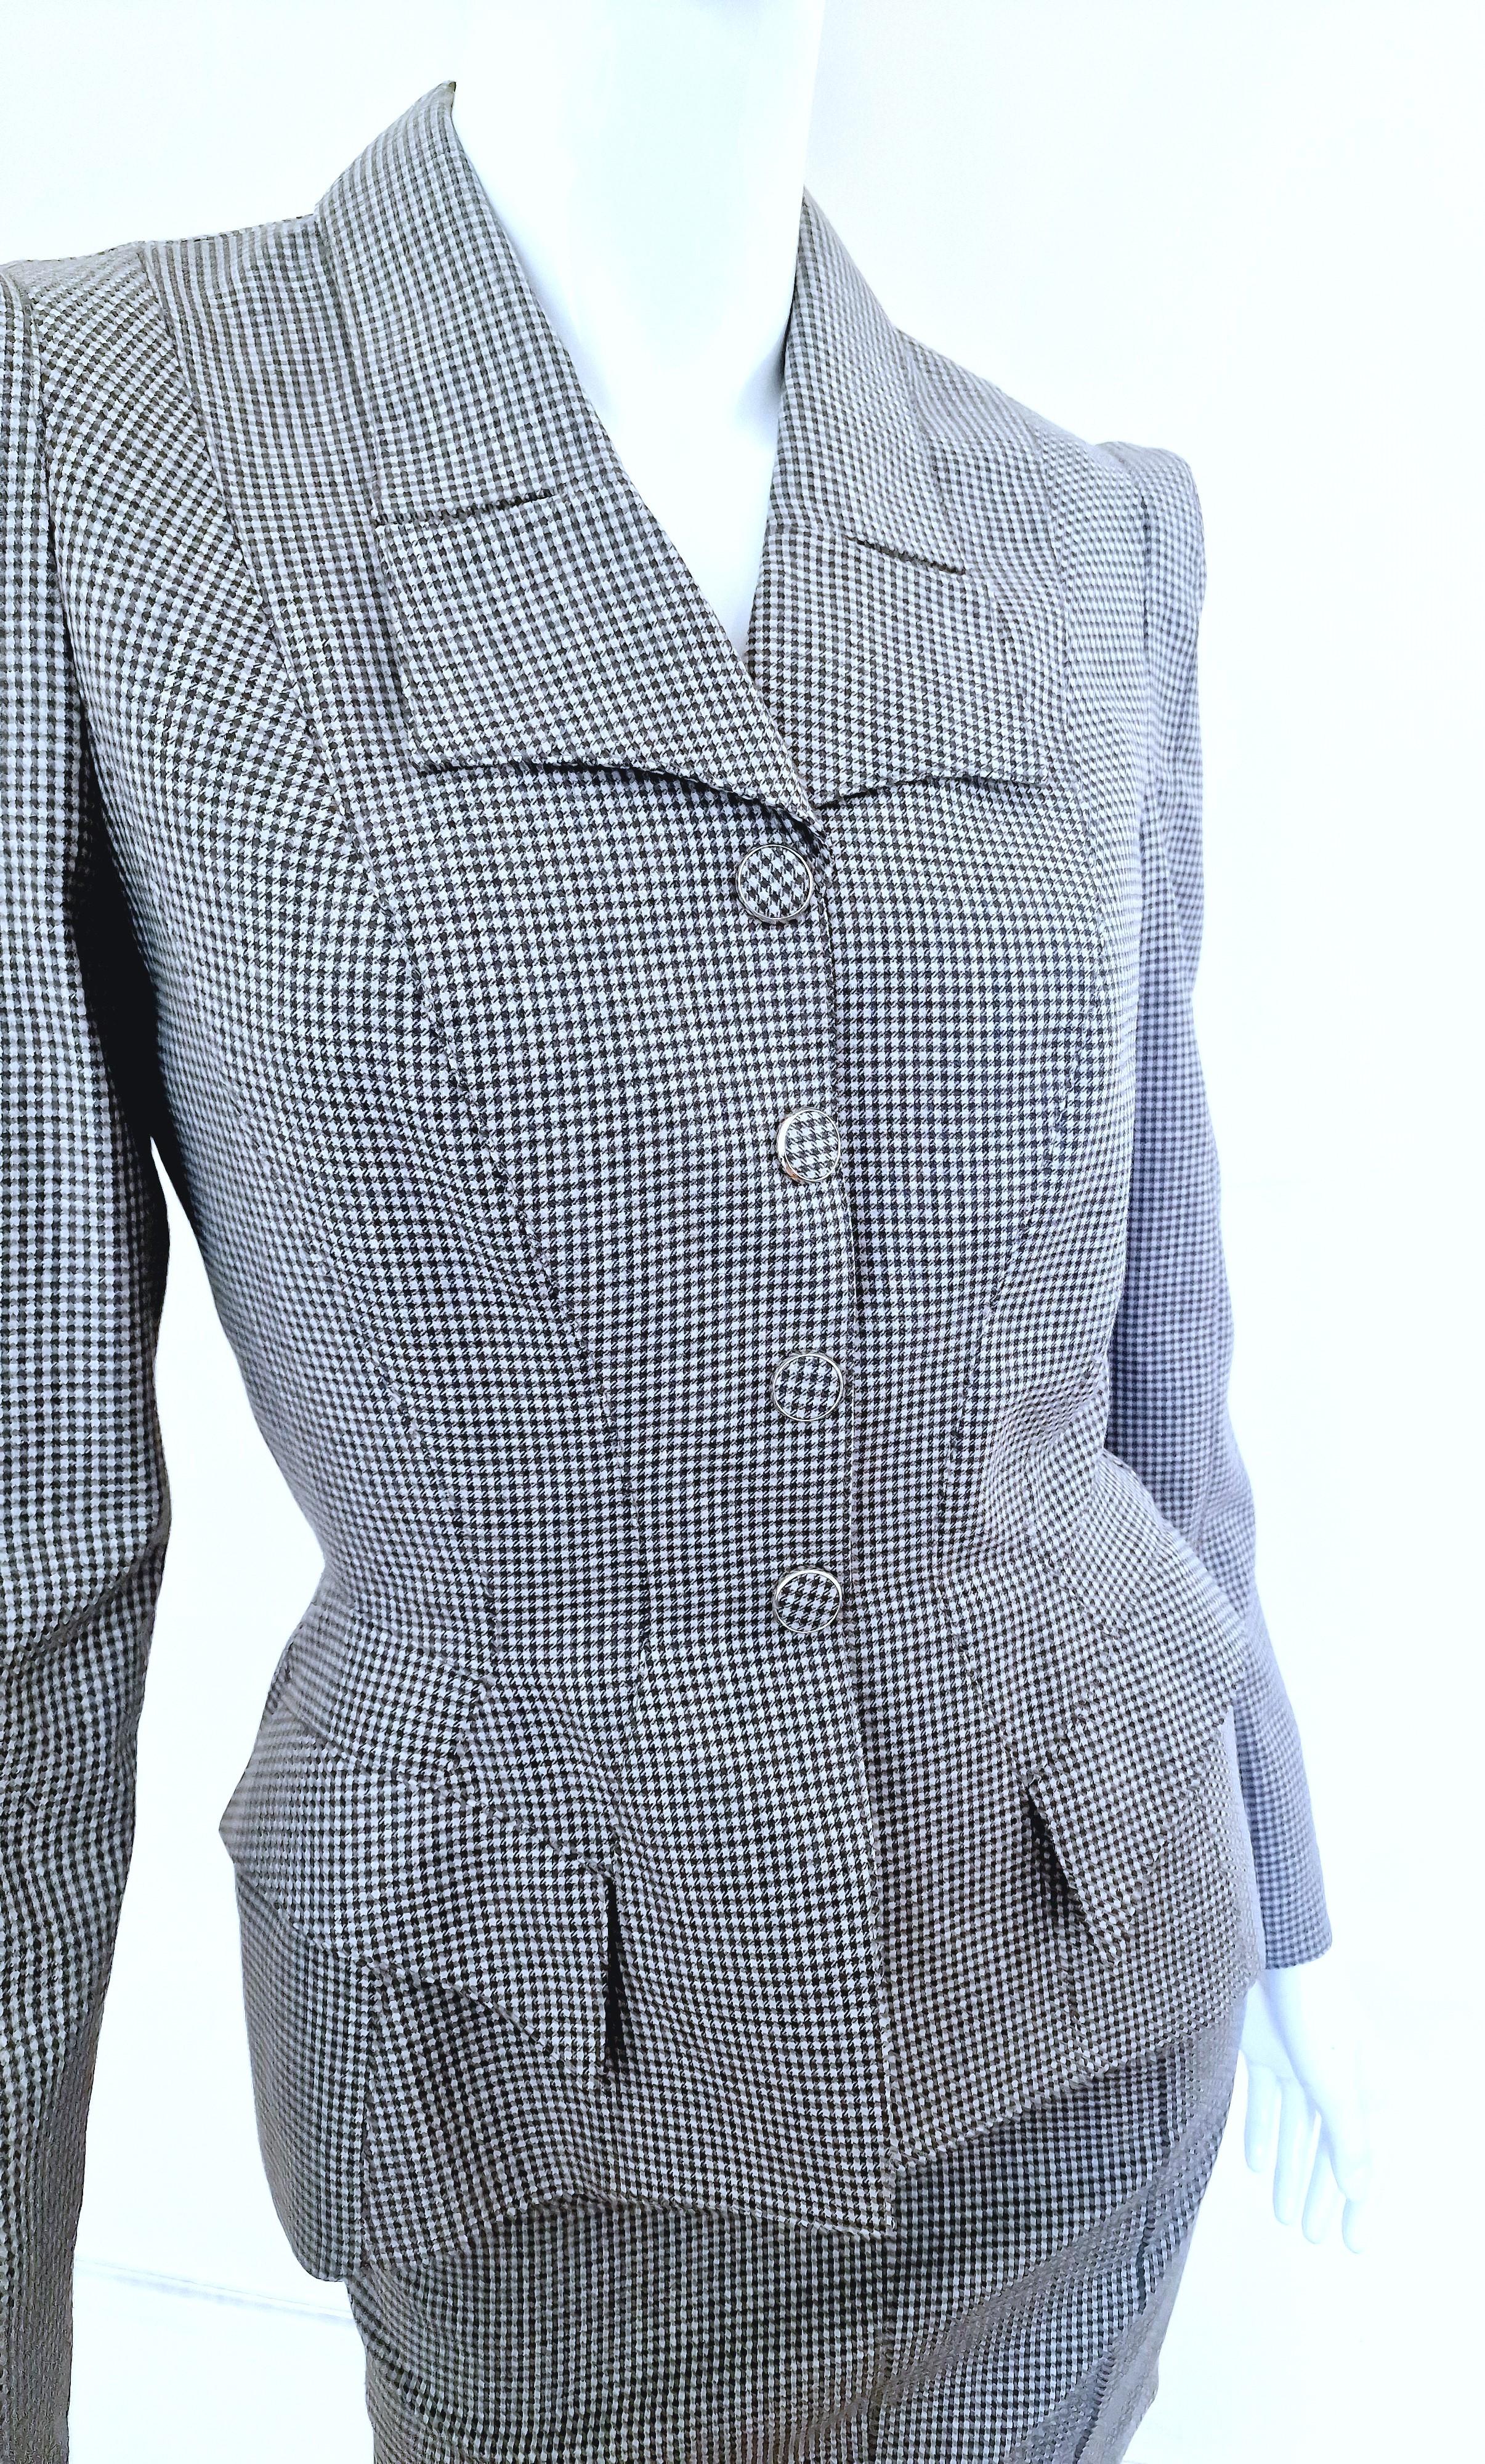 Thierry Mugler Houndstooth Check Evening Vampire XS Dress Set Jacket Skirt Suit In Excellent Condition For Sale In PARIS, FR